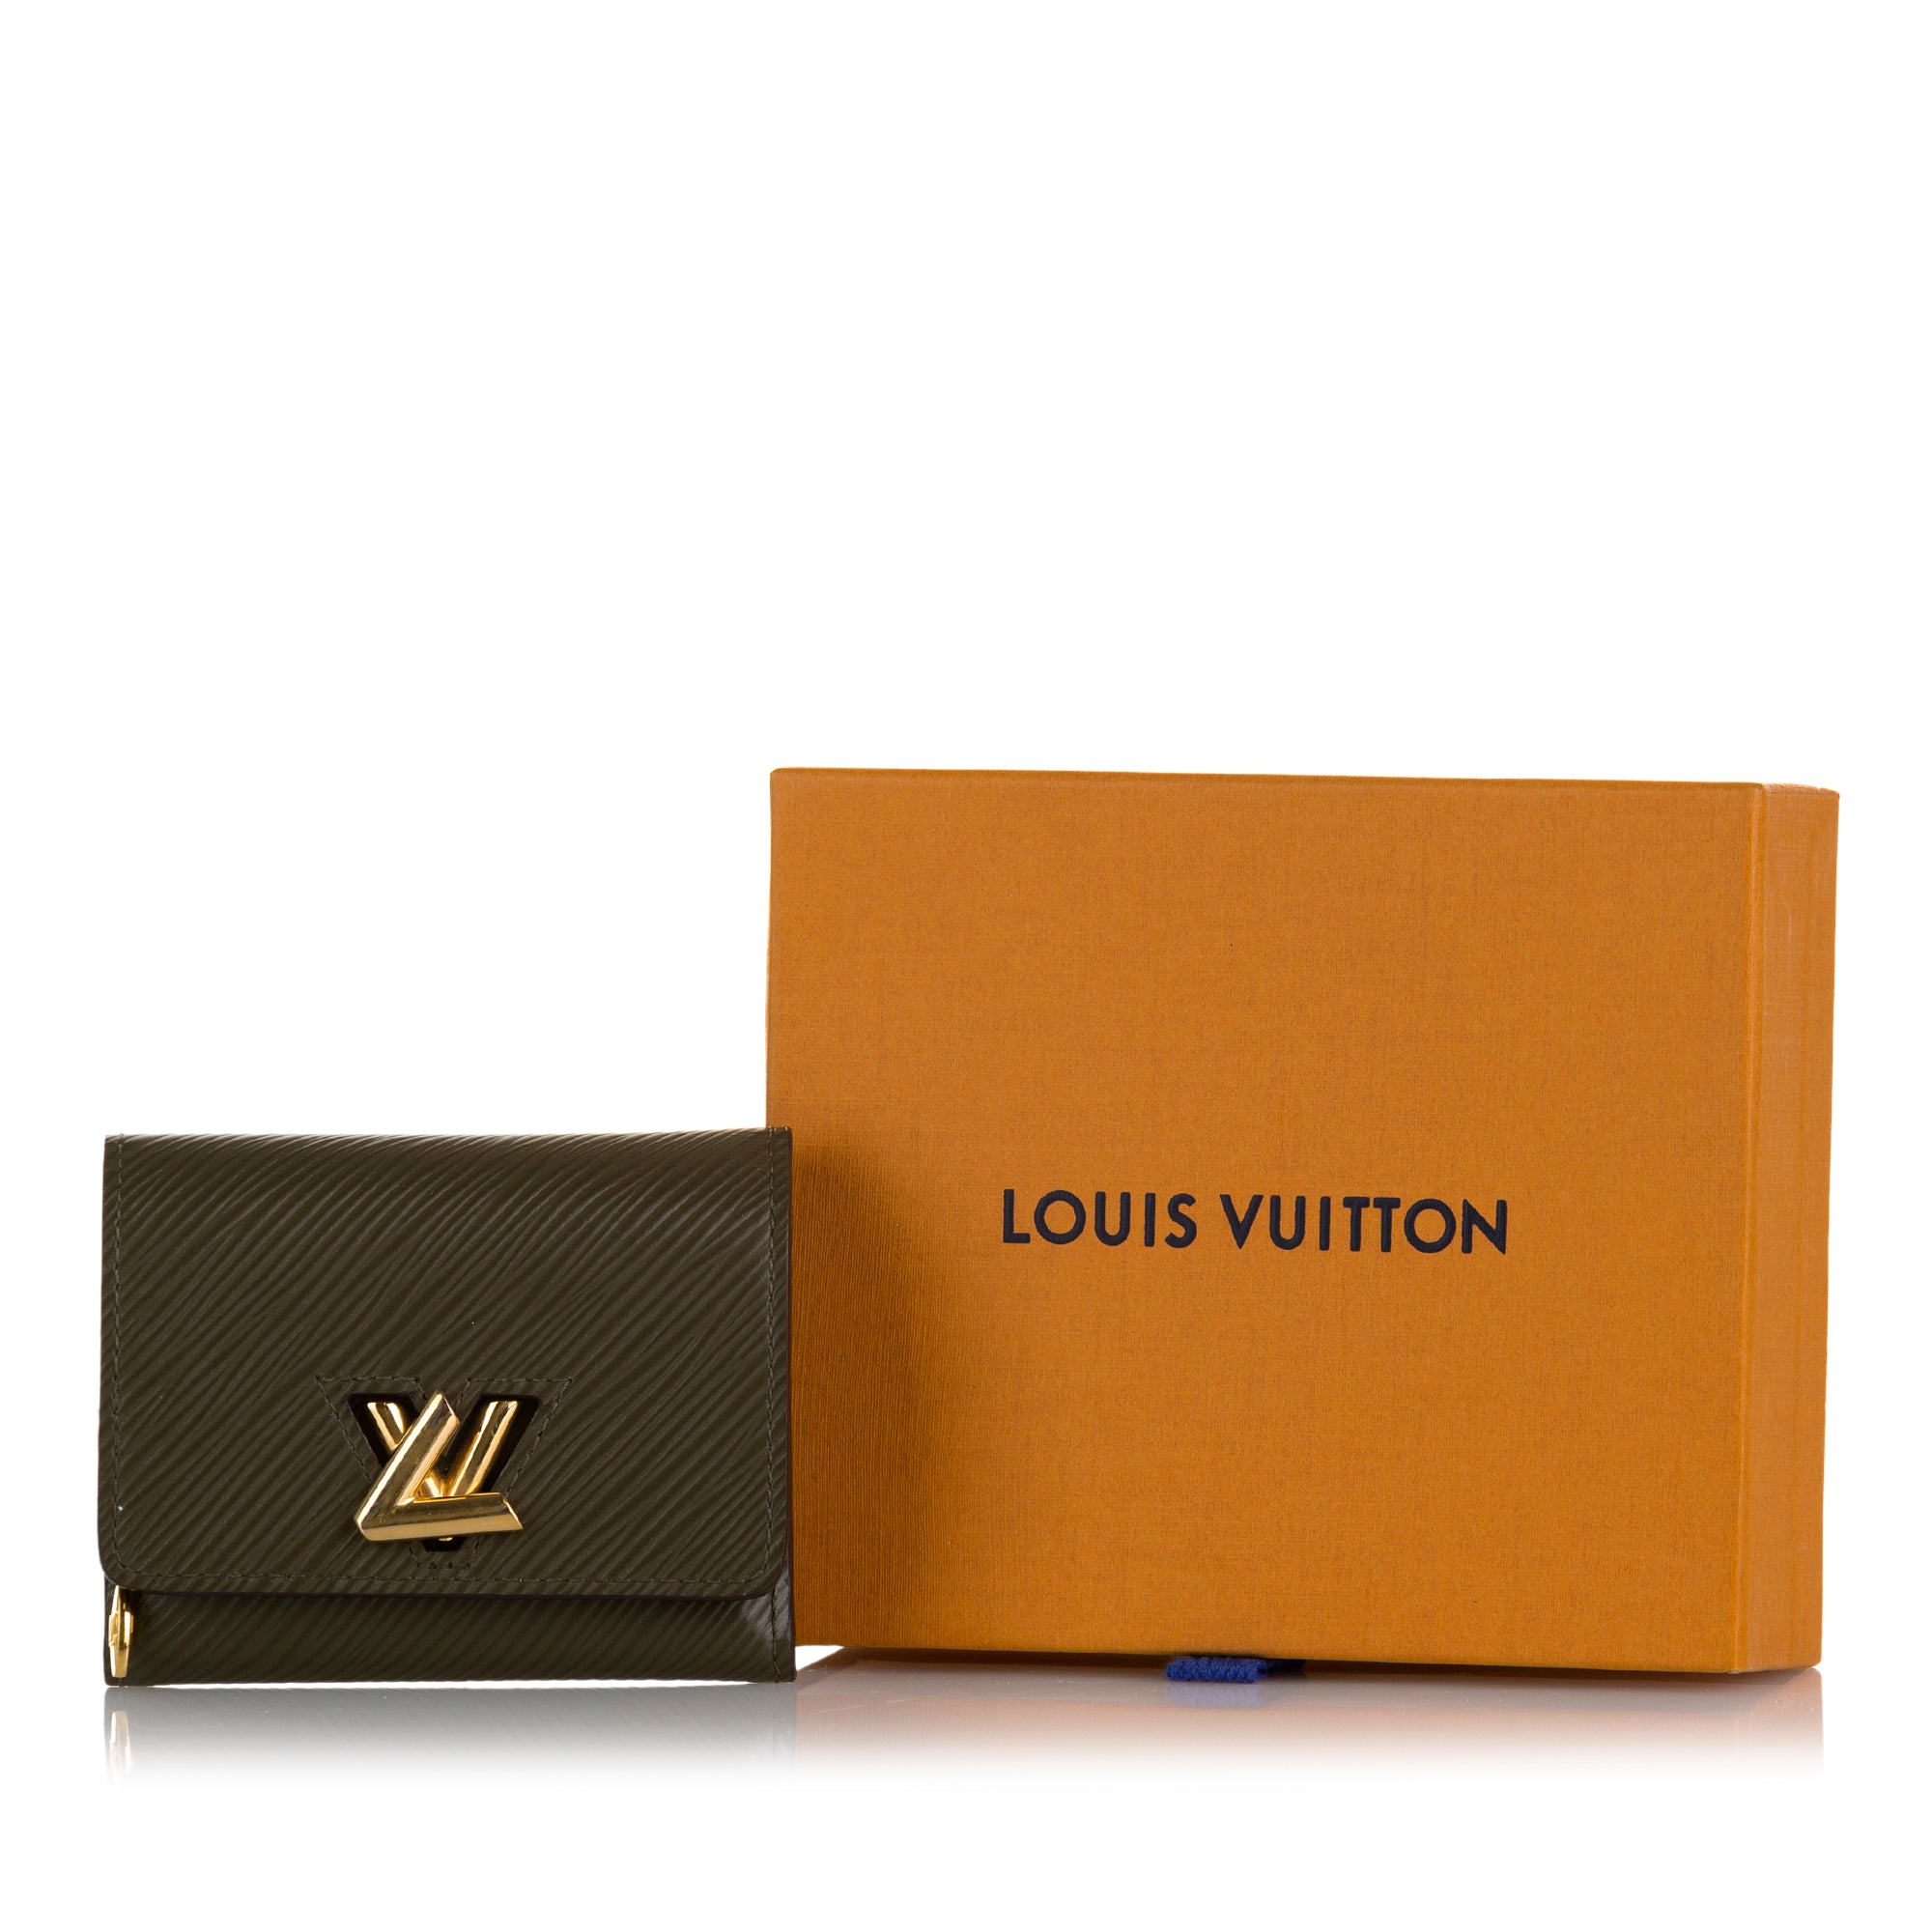 What A $600 Wallet Gets You : Louis Vuitton Taiga Leather Wallet